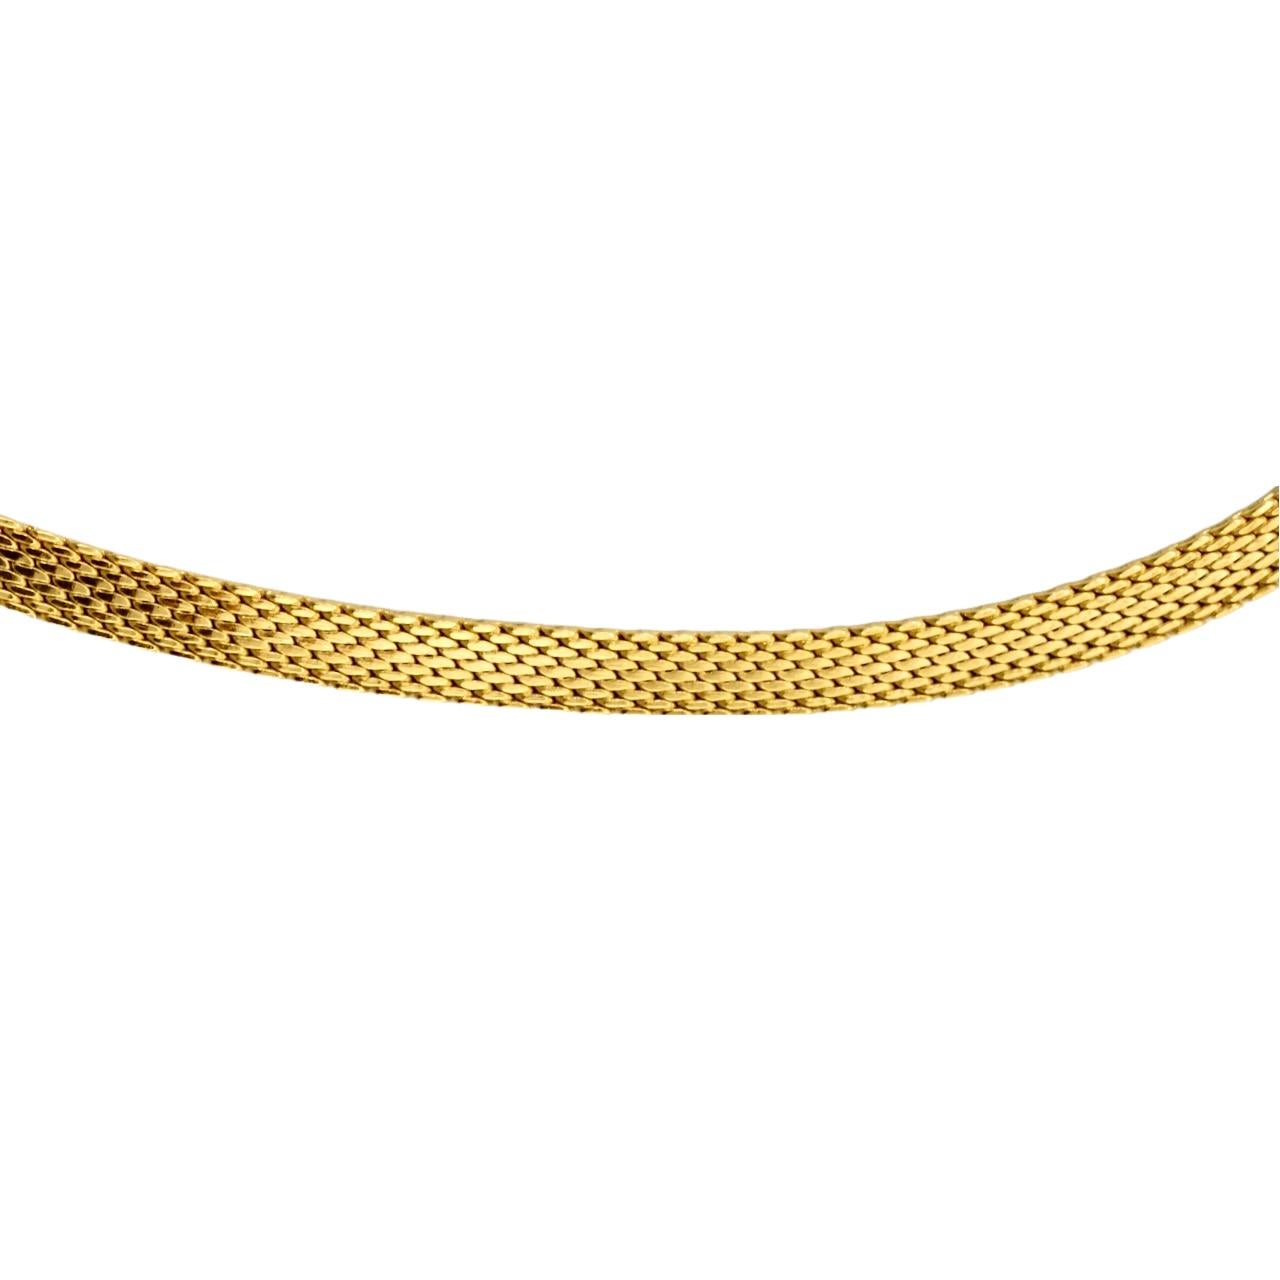 Women's or Men's Gold Plated Egyptian Revival Textured and Shiny Mesh Collar Necklace circa 1980s